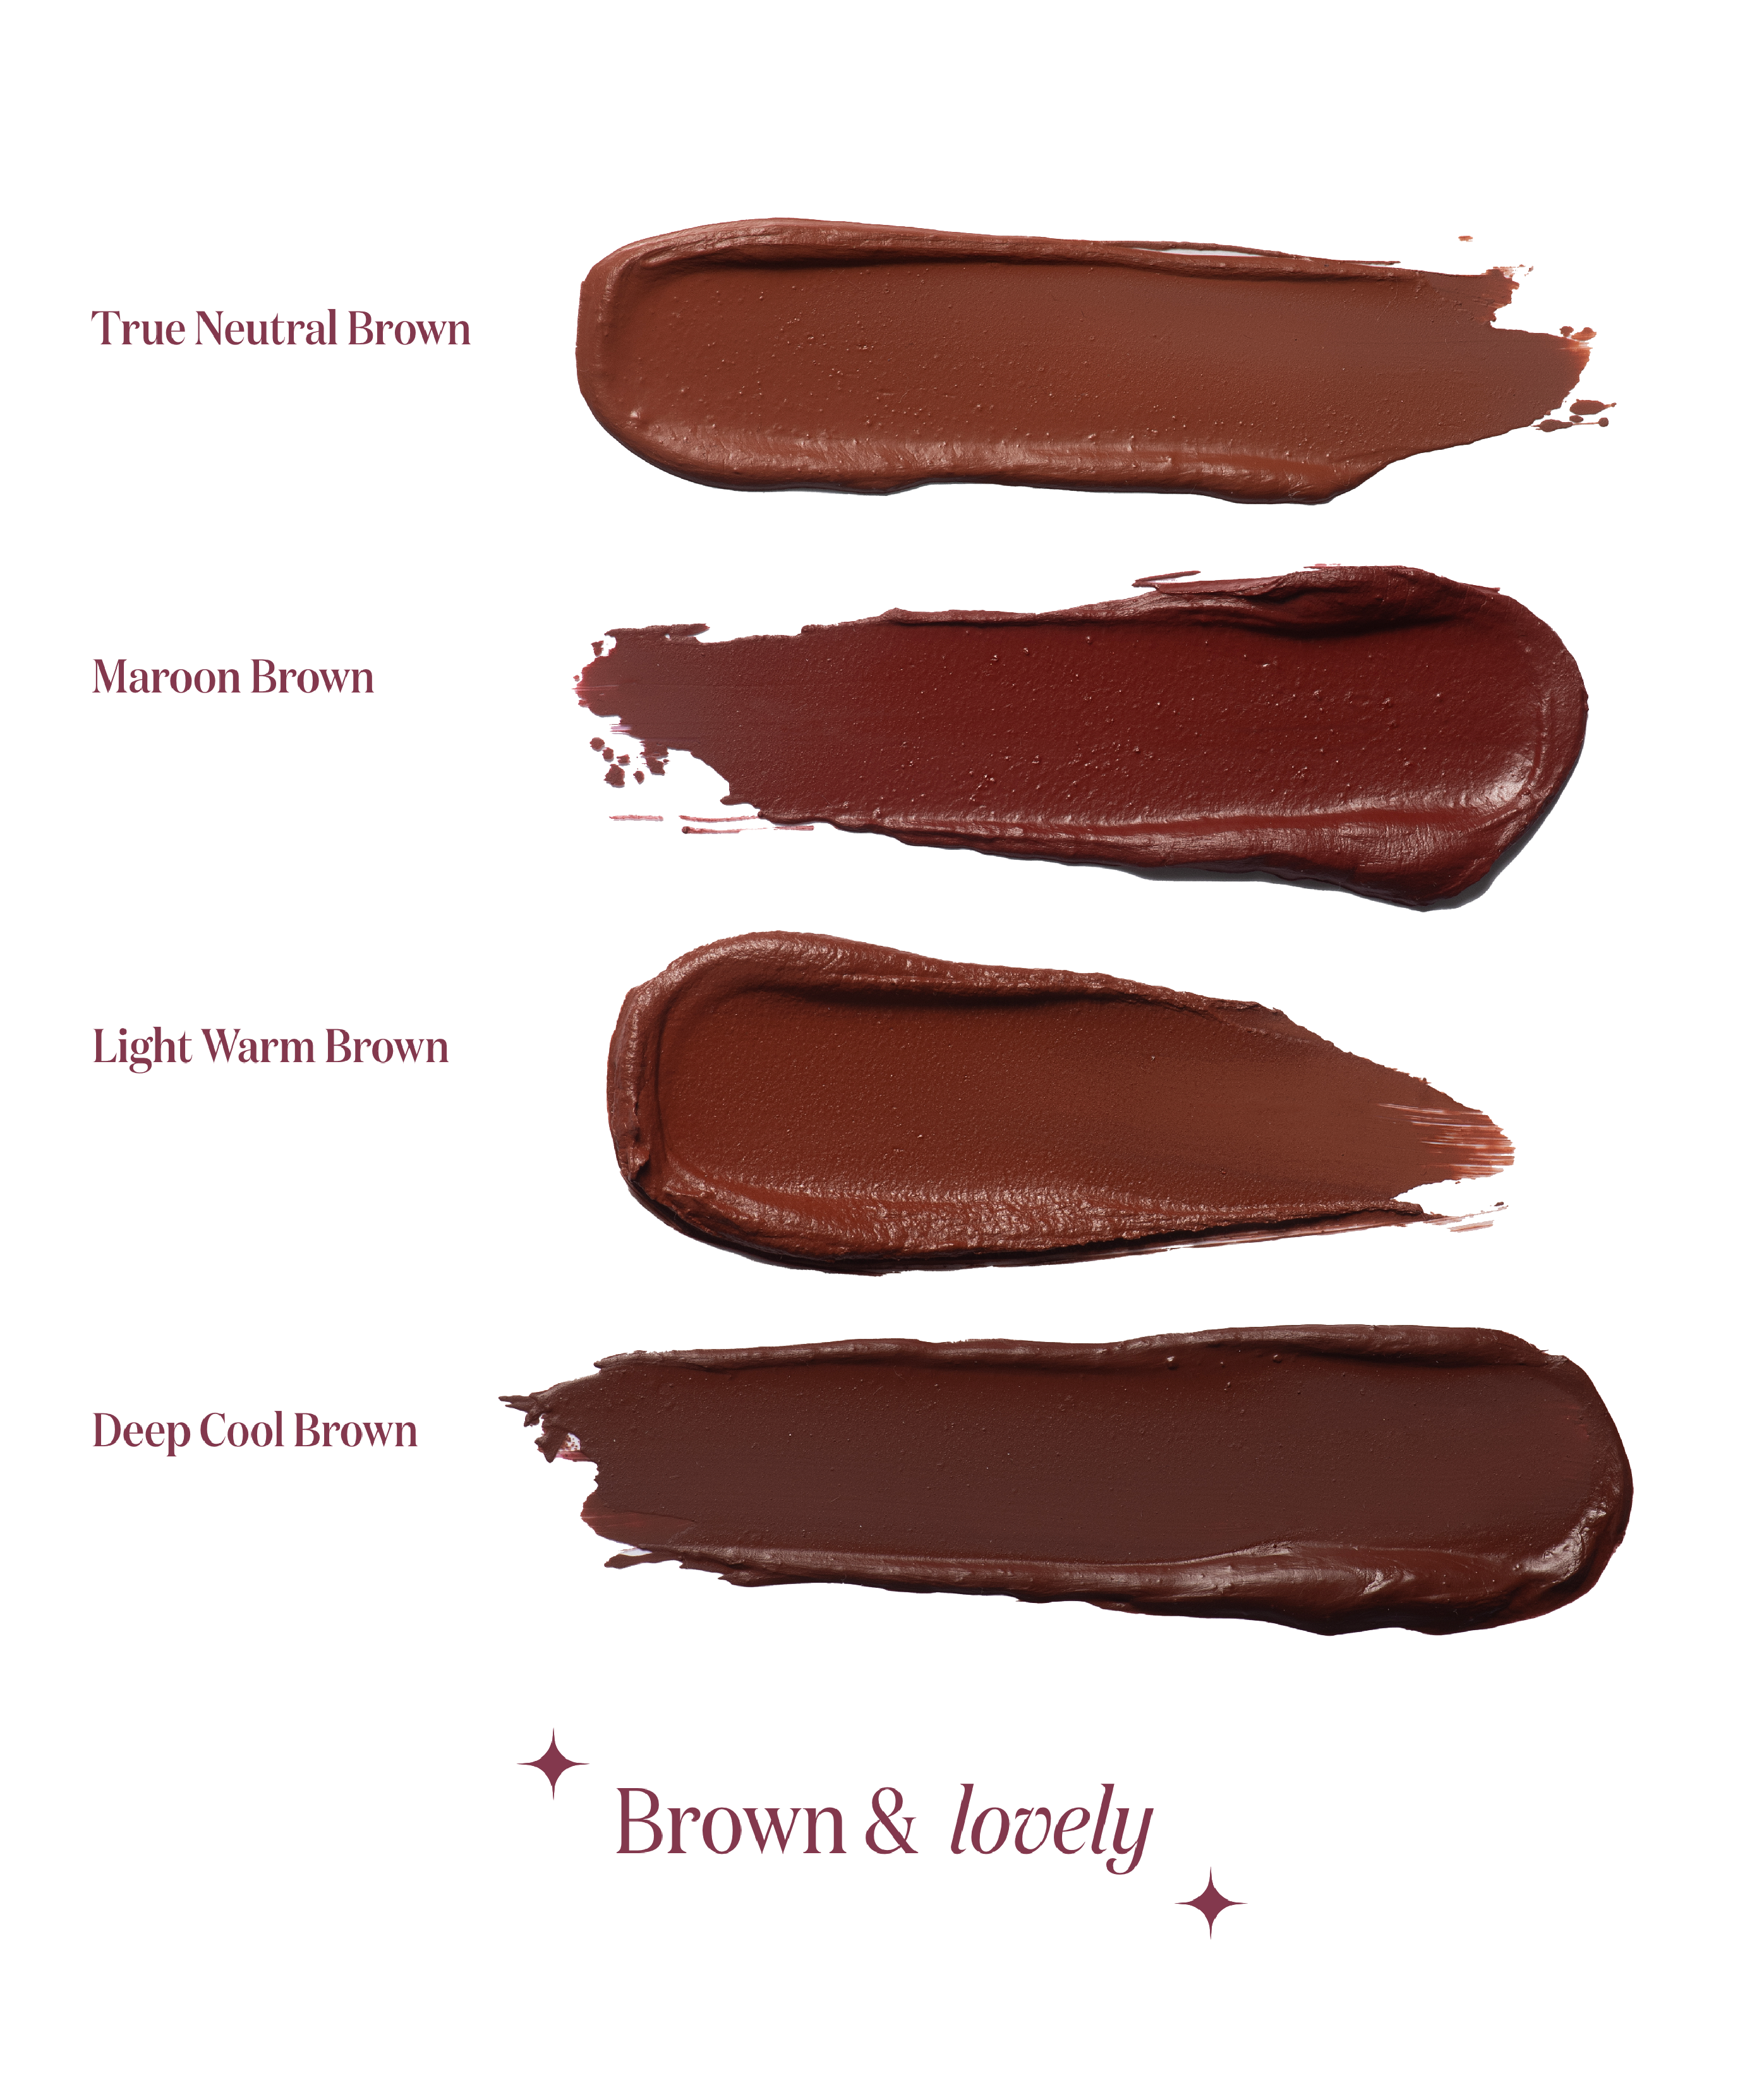 #color_brown and lovely - everyday browns